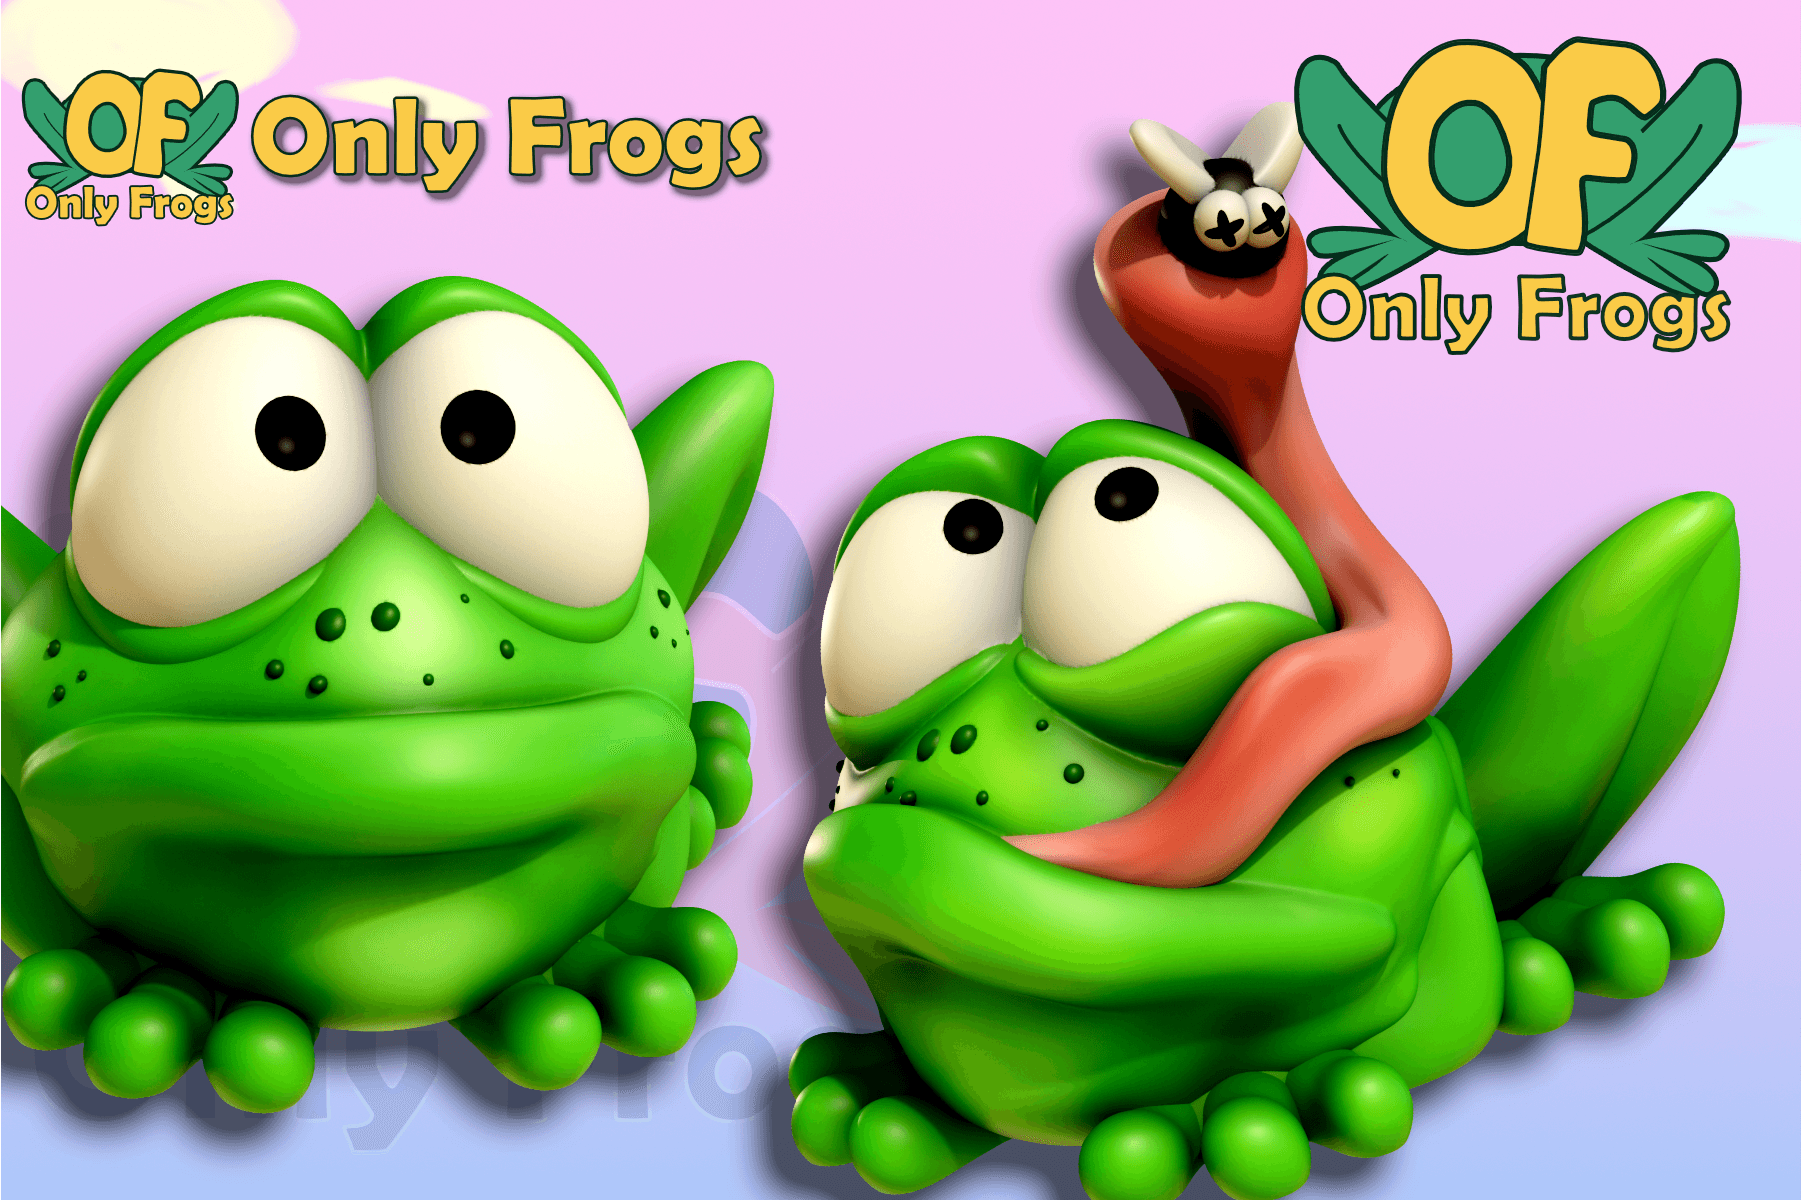 If we get a top 3 ranking I will donate the prize to a Only Frogs maker! Prize valued between $150 and $300